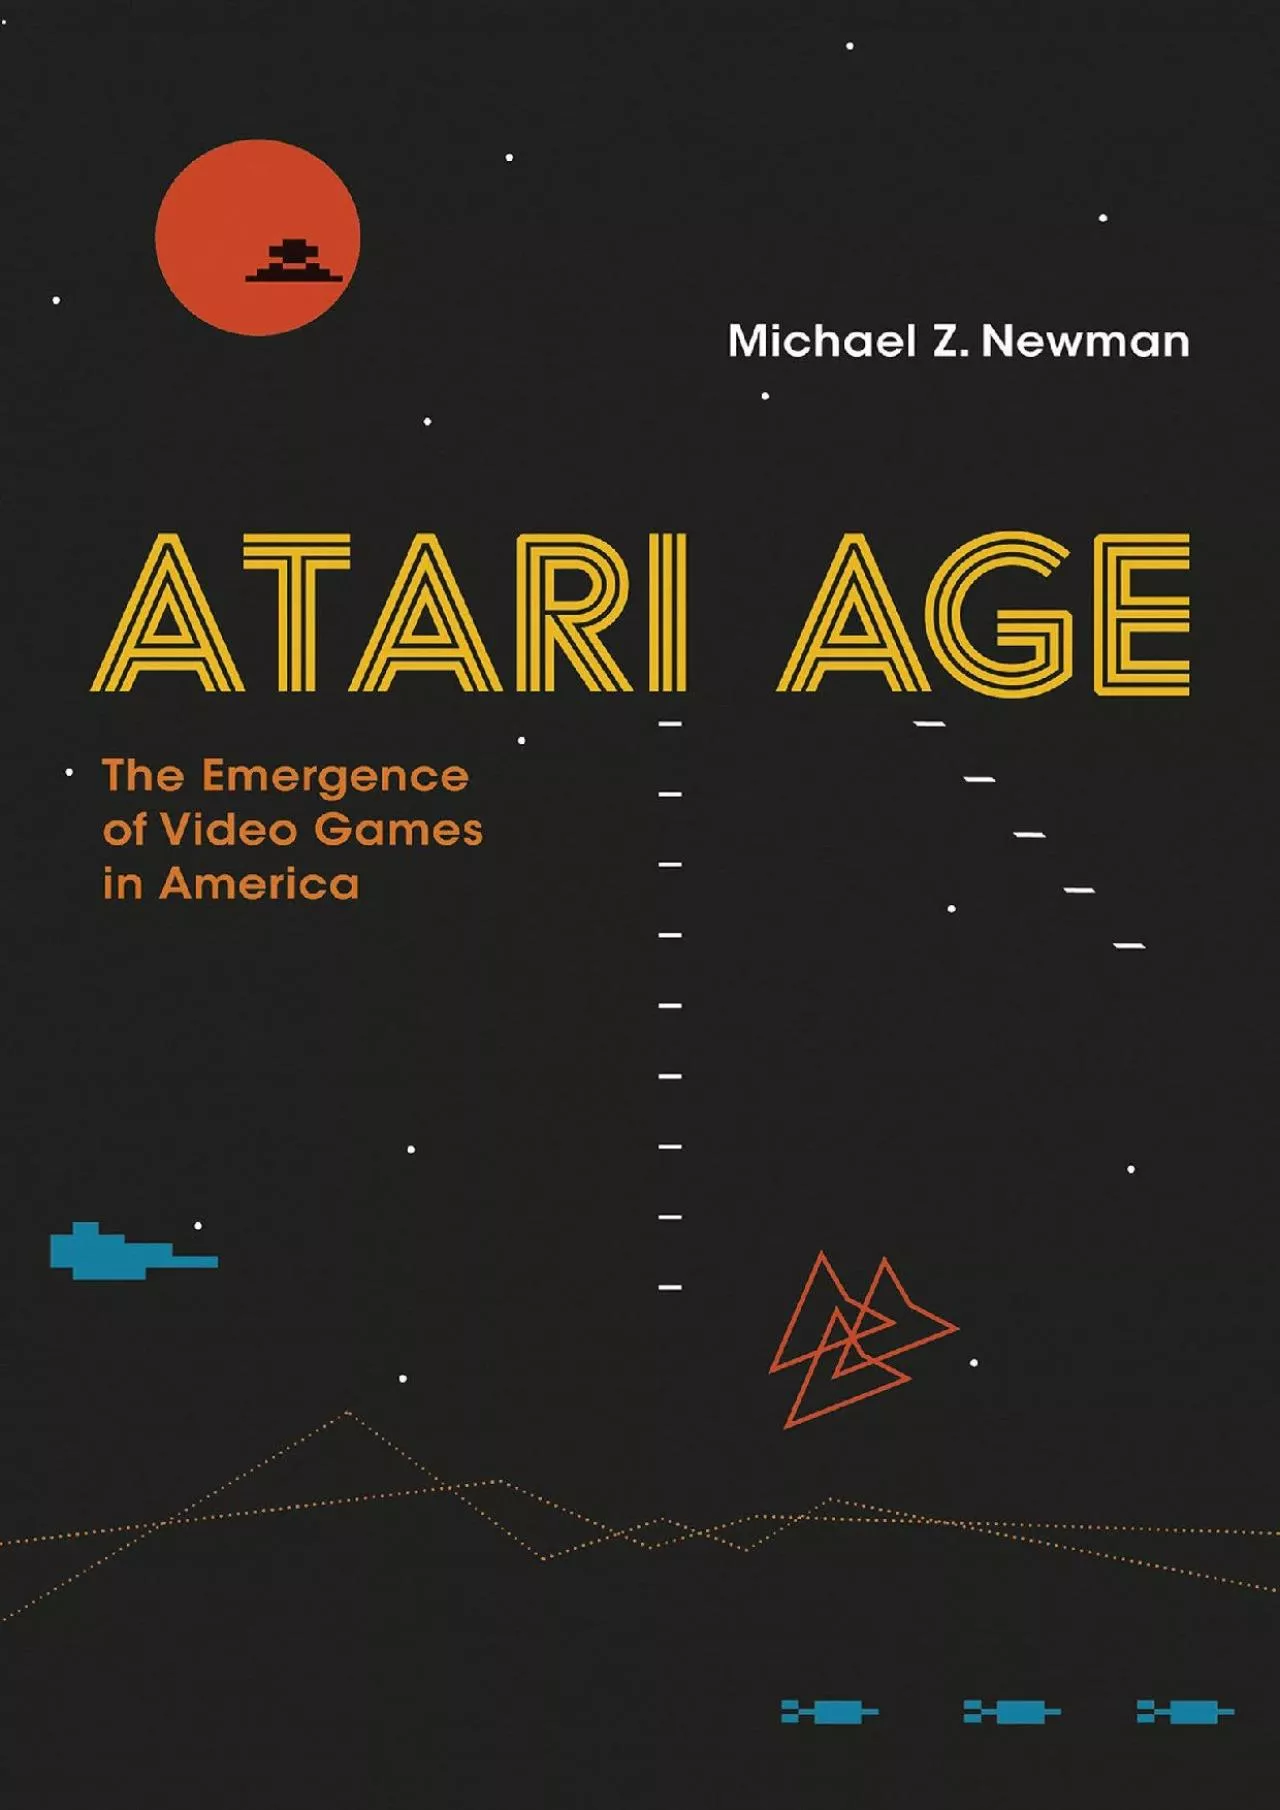 [BOOK]-Atari Age: The Emergence of Video Games in America (The MIT Press)